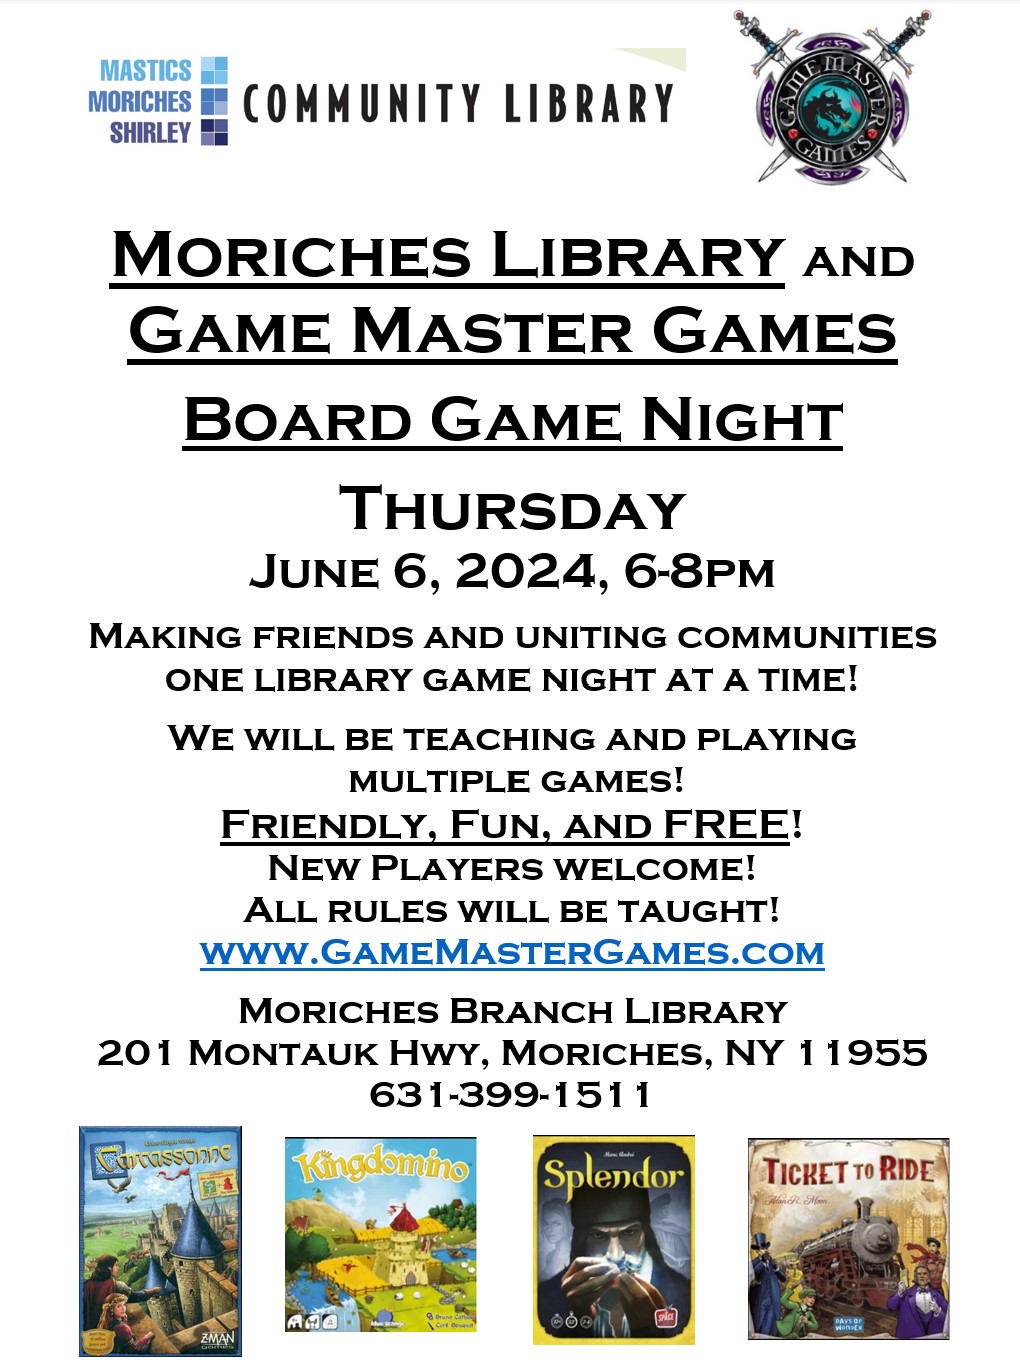 Board Game Night at the Moriches Library! Have fun and make some new friends!